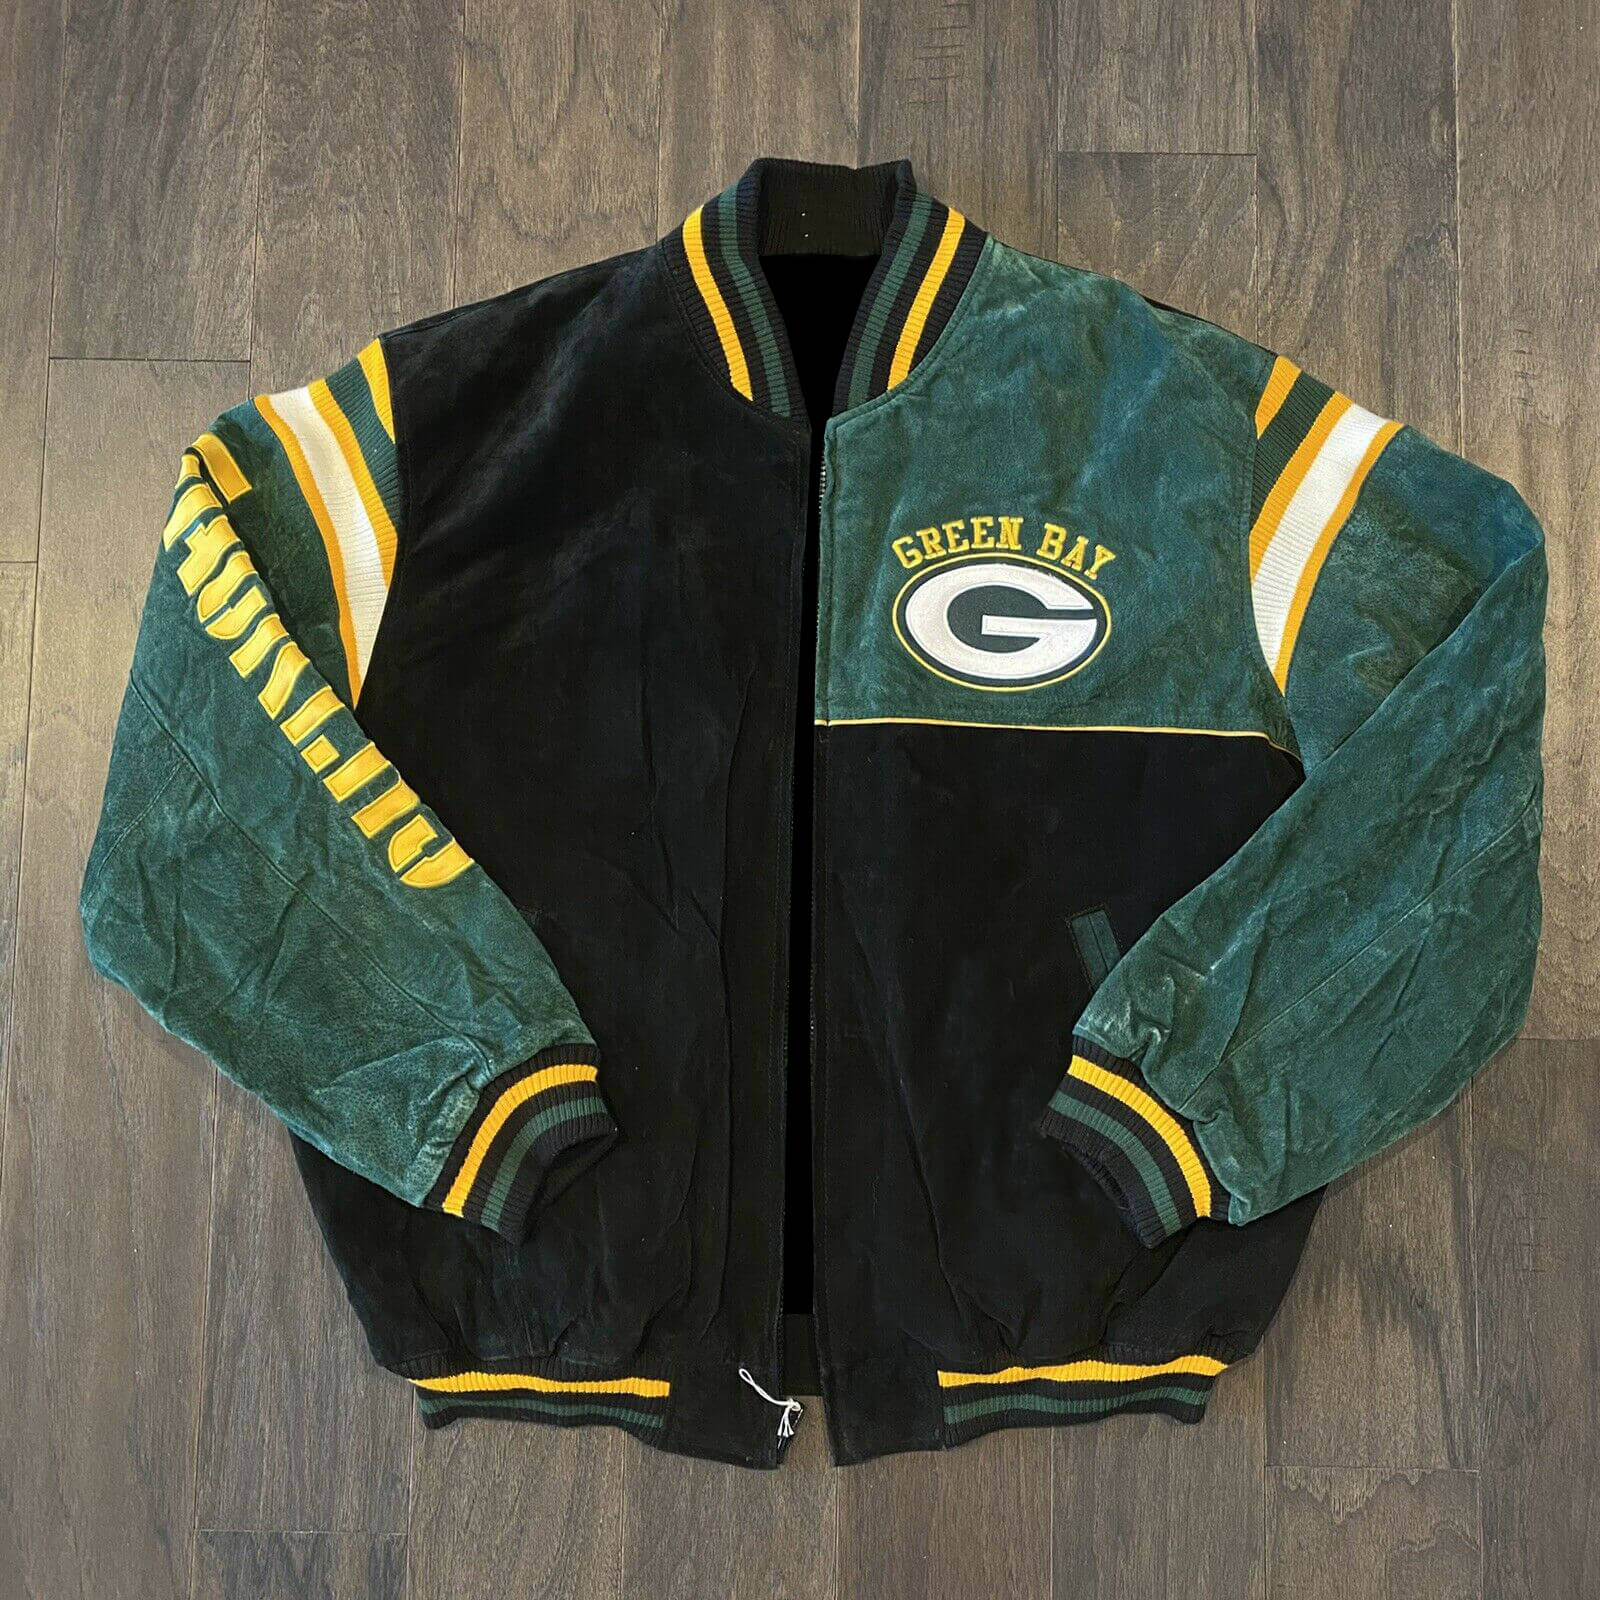 Green Bay Packers NFL Wool Leather Jacket - Maker of Jacket